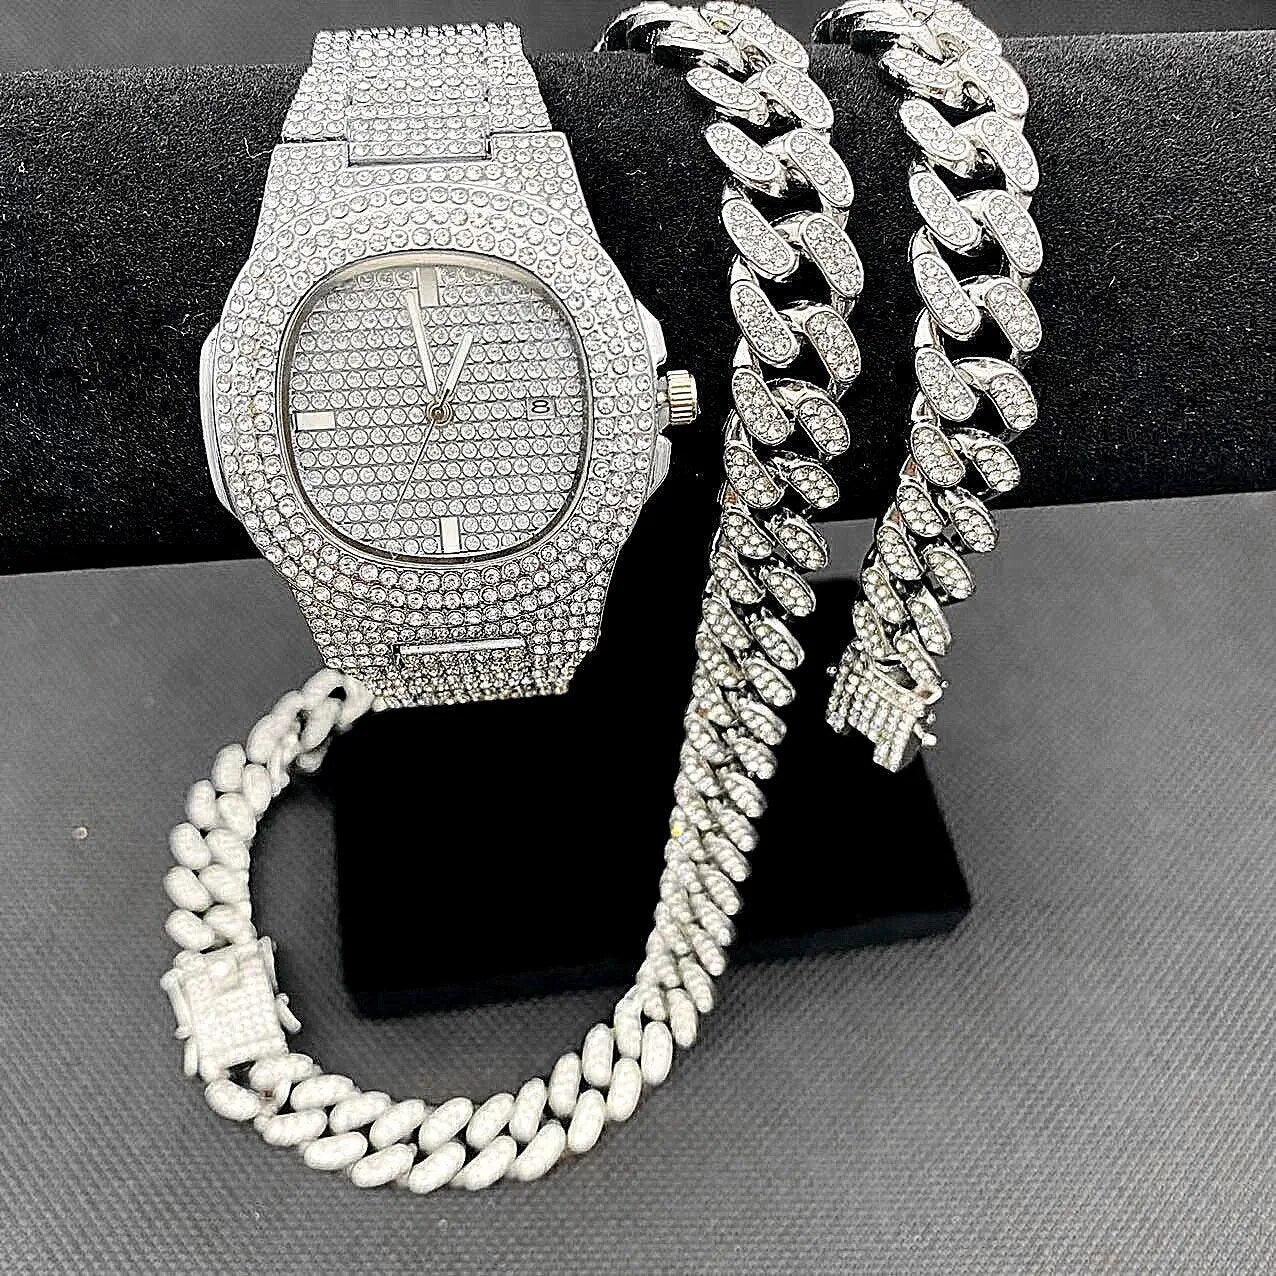 Luxury Iced Out Watch Necklaces Bracelet Mens Hip Hop Jewelry Set Miama Cuban Link Chain Choker Jewelry Blinged Out Gold Watches